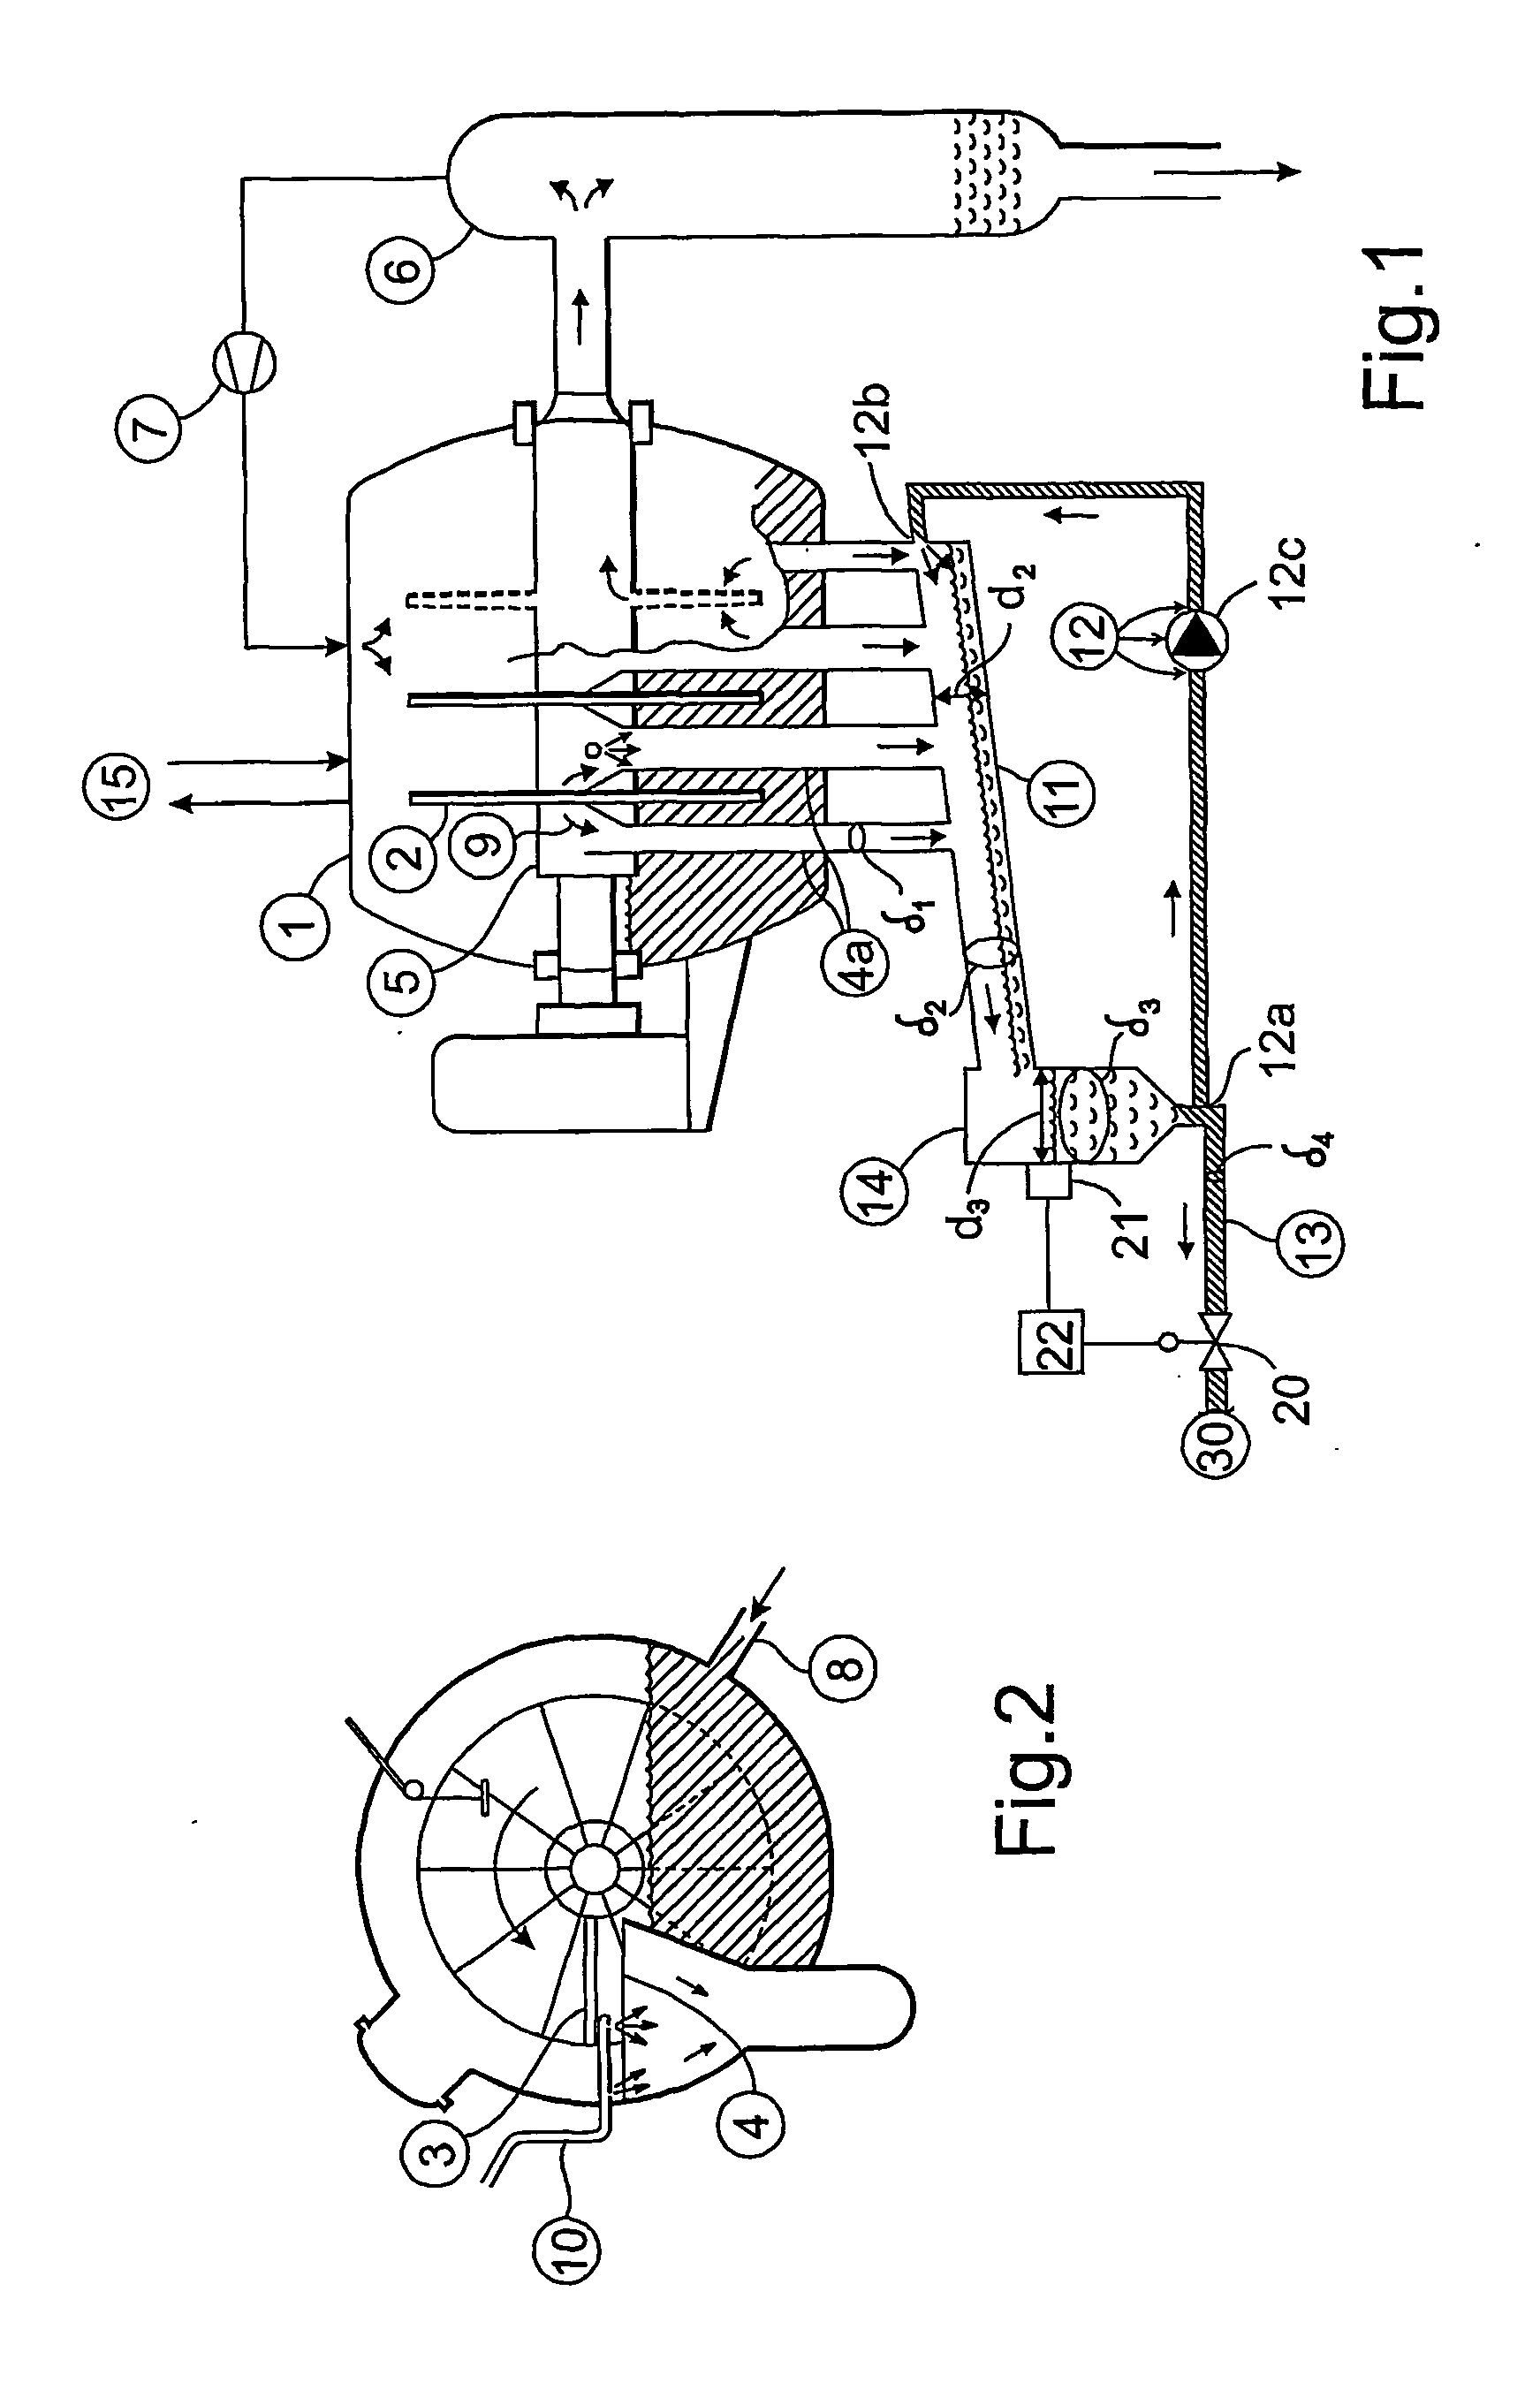 Pipe system for receiving and transporting lime sludge from a white liquor filter